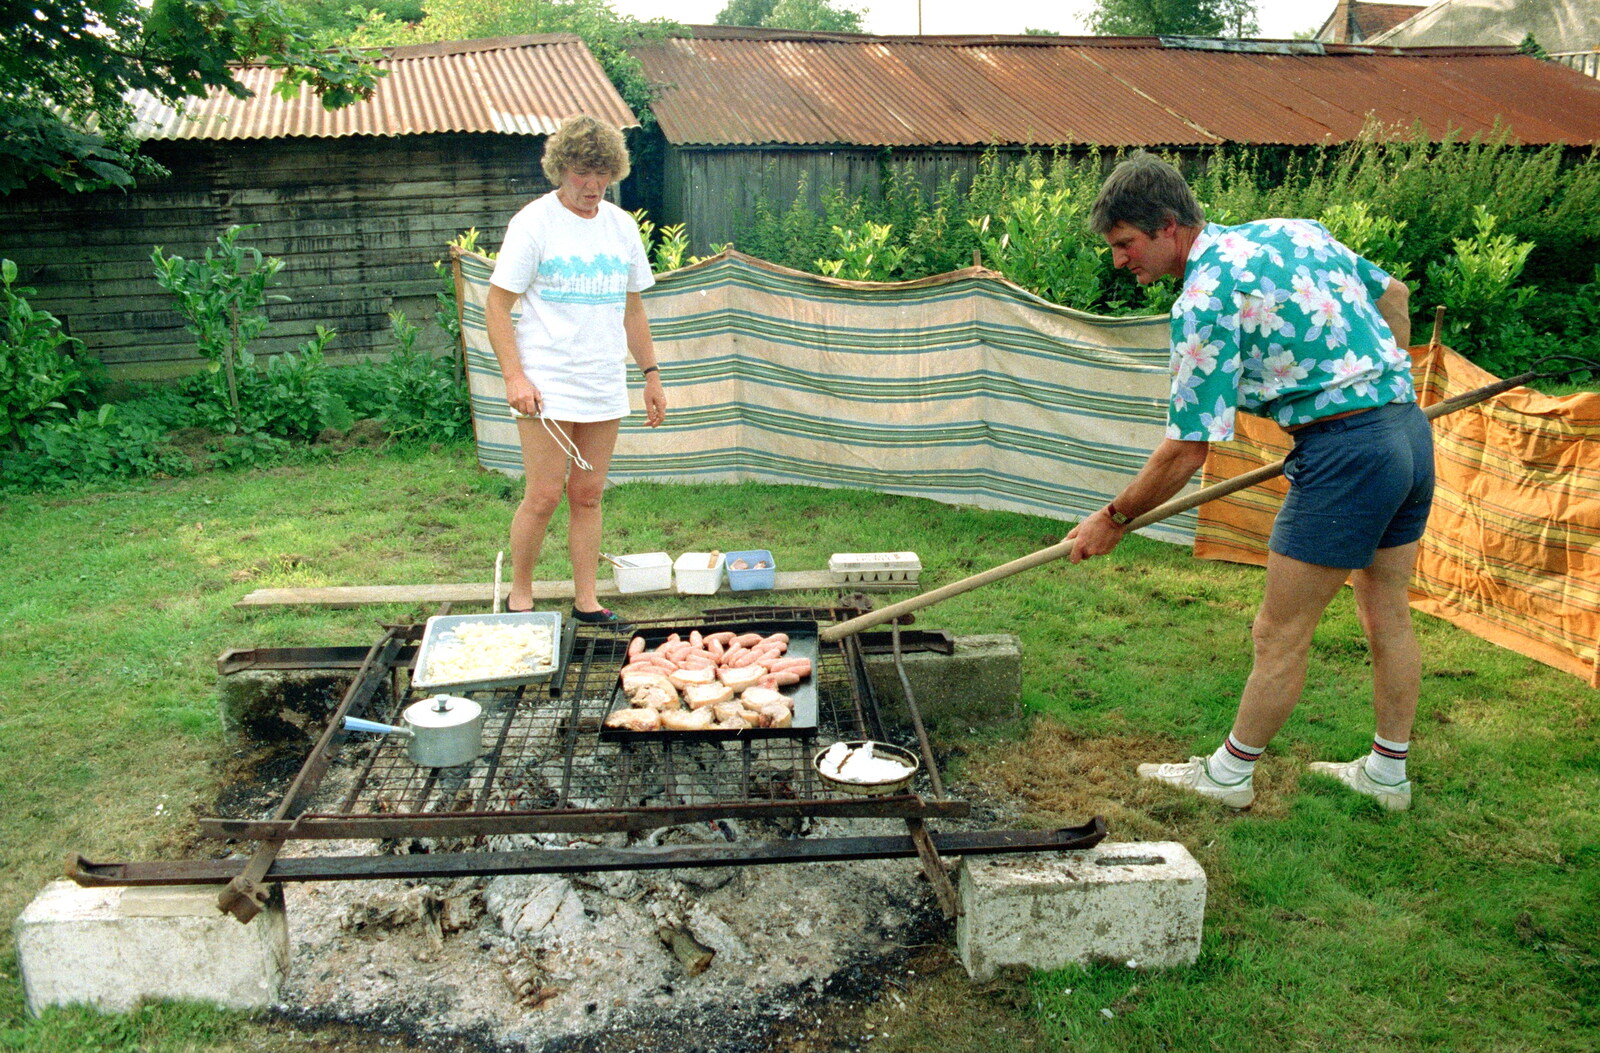 Geoff pokes the massive barbeque pit from A Geoff and Brenda Barbeque, Stuston, Suffolk - 3rd April 1994